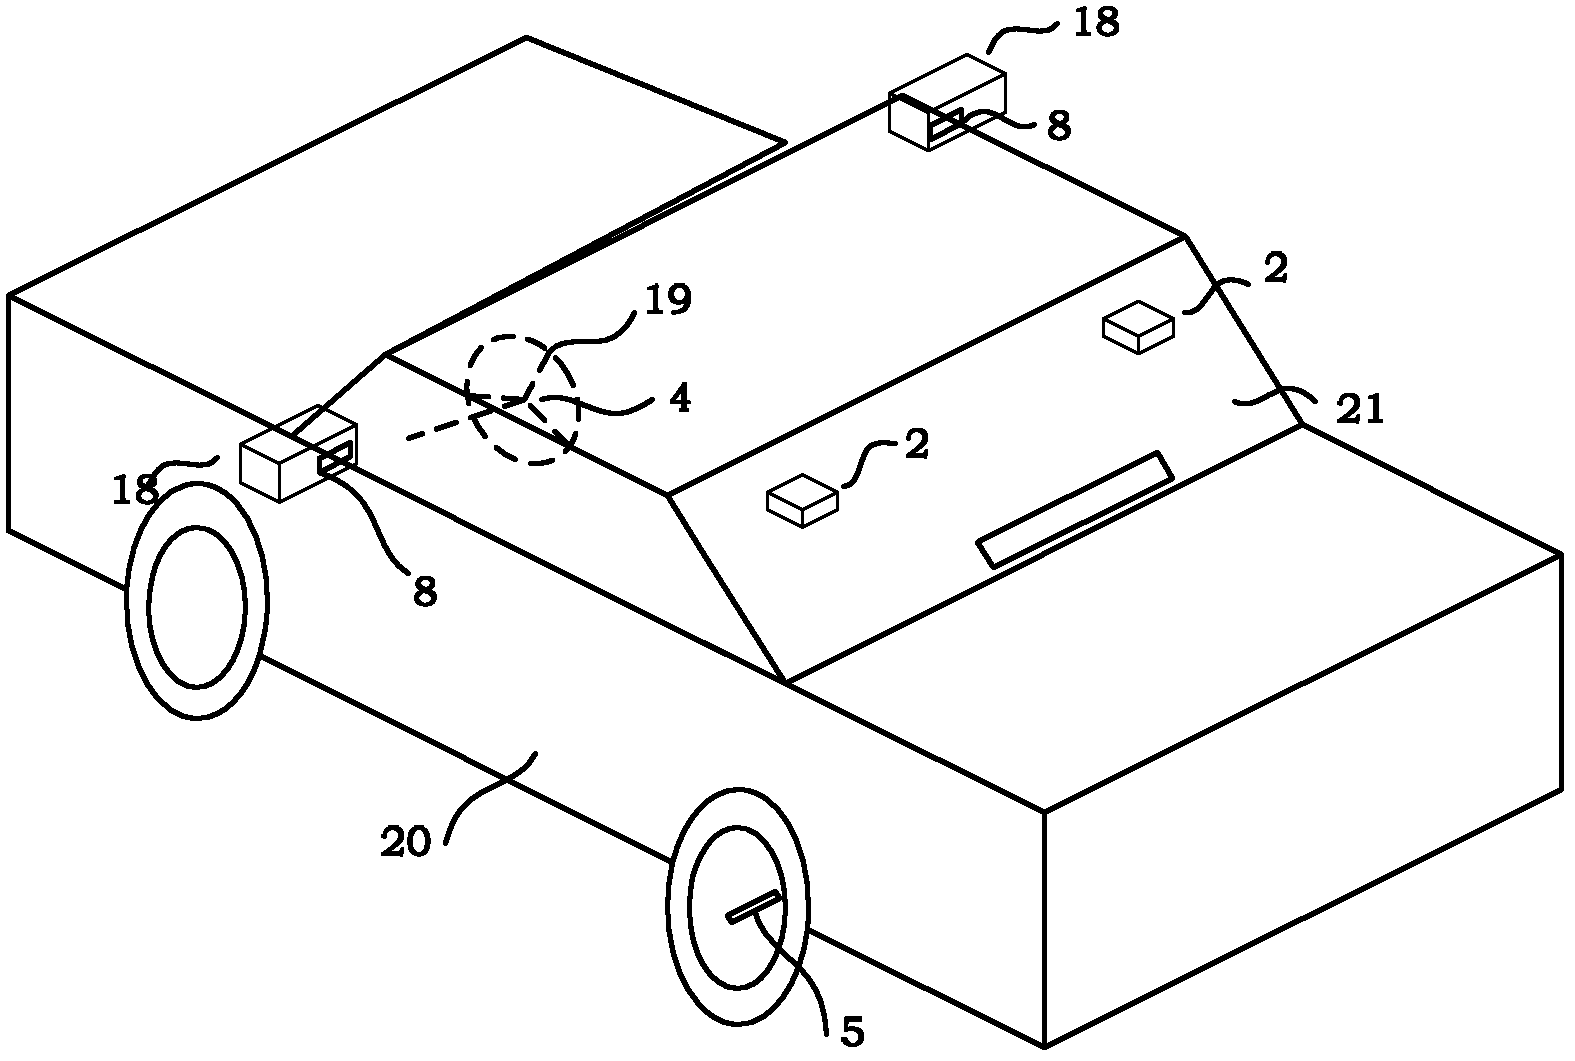 Safe pre-warning device for anti-collision at rear of vehicle based on binocular stereo vision